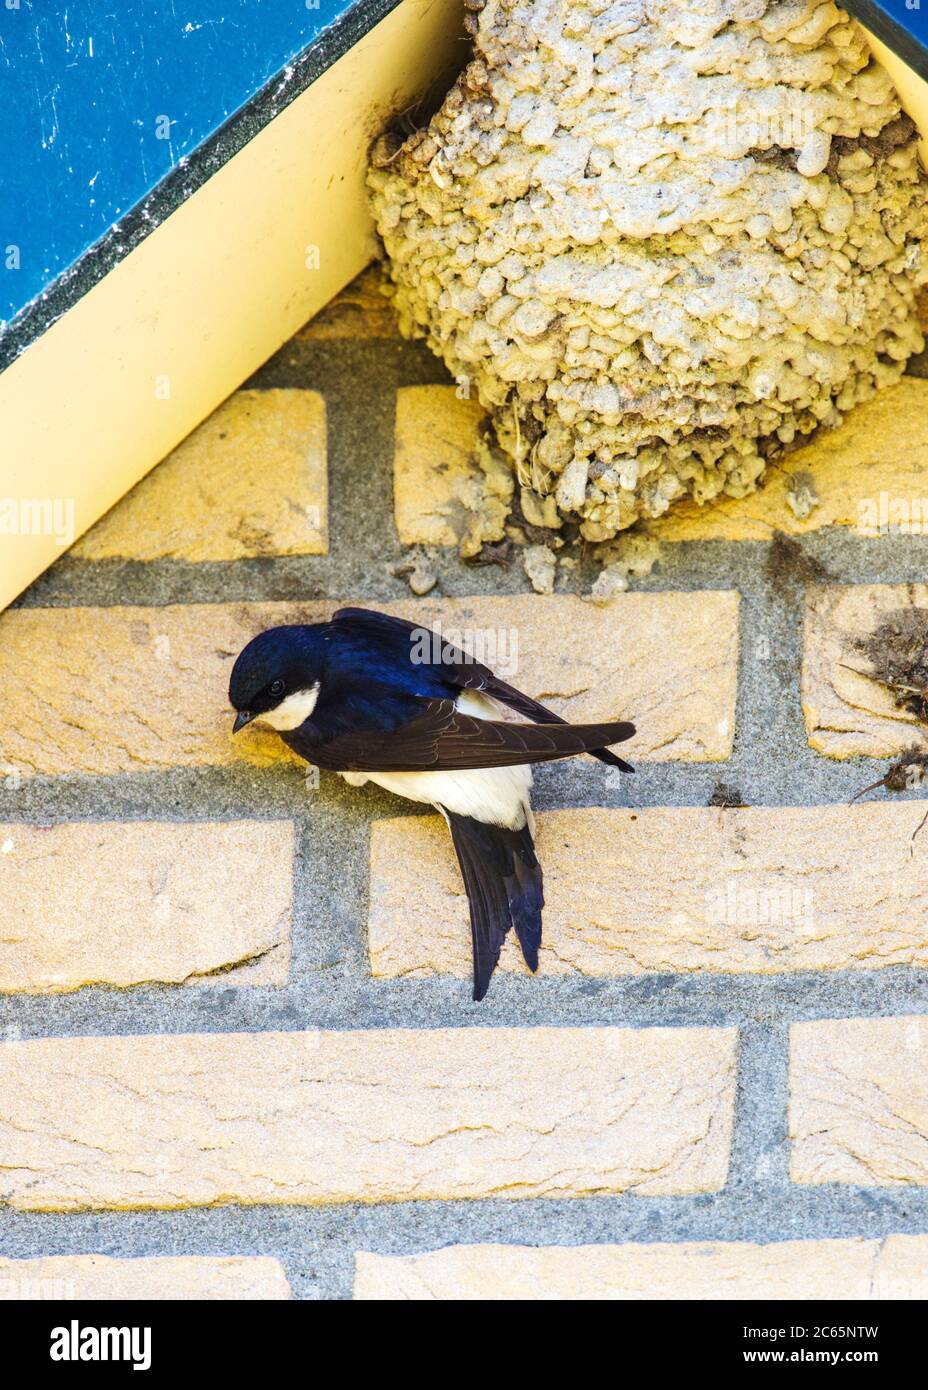 Common House Martin (Delichon urbica) clinging to wall of a house near its nest in an urban area in Friesland, Netherlands. Bird looking down. Stock Photo